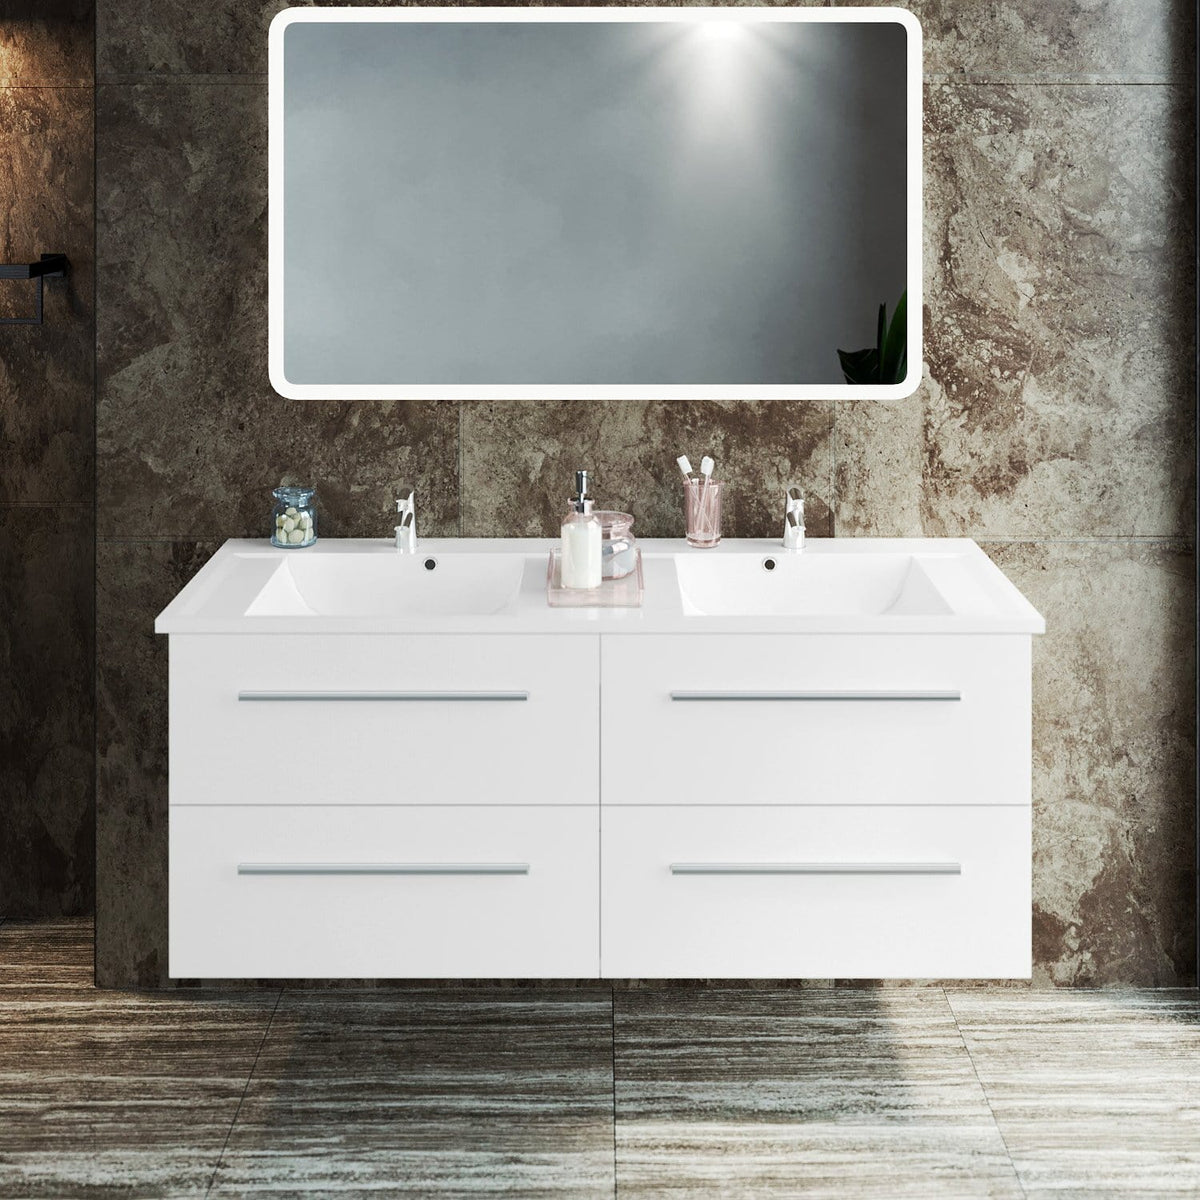 industrial style vanity cabinets with black faucets